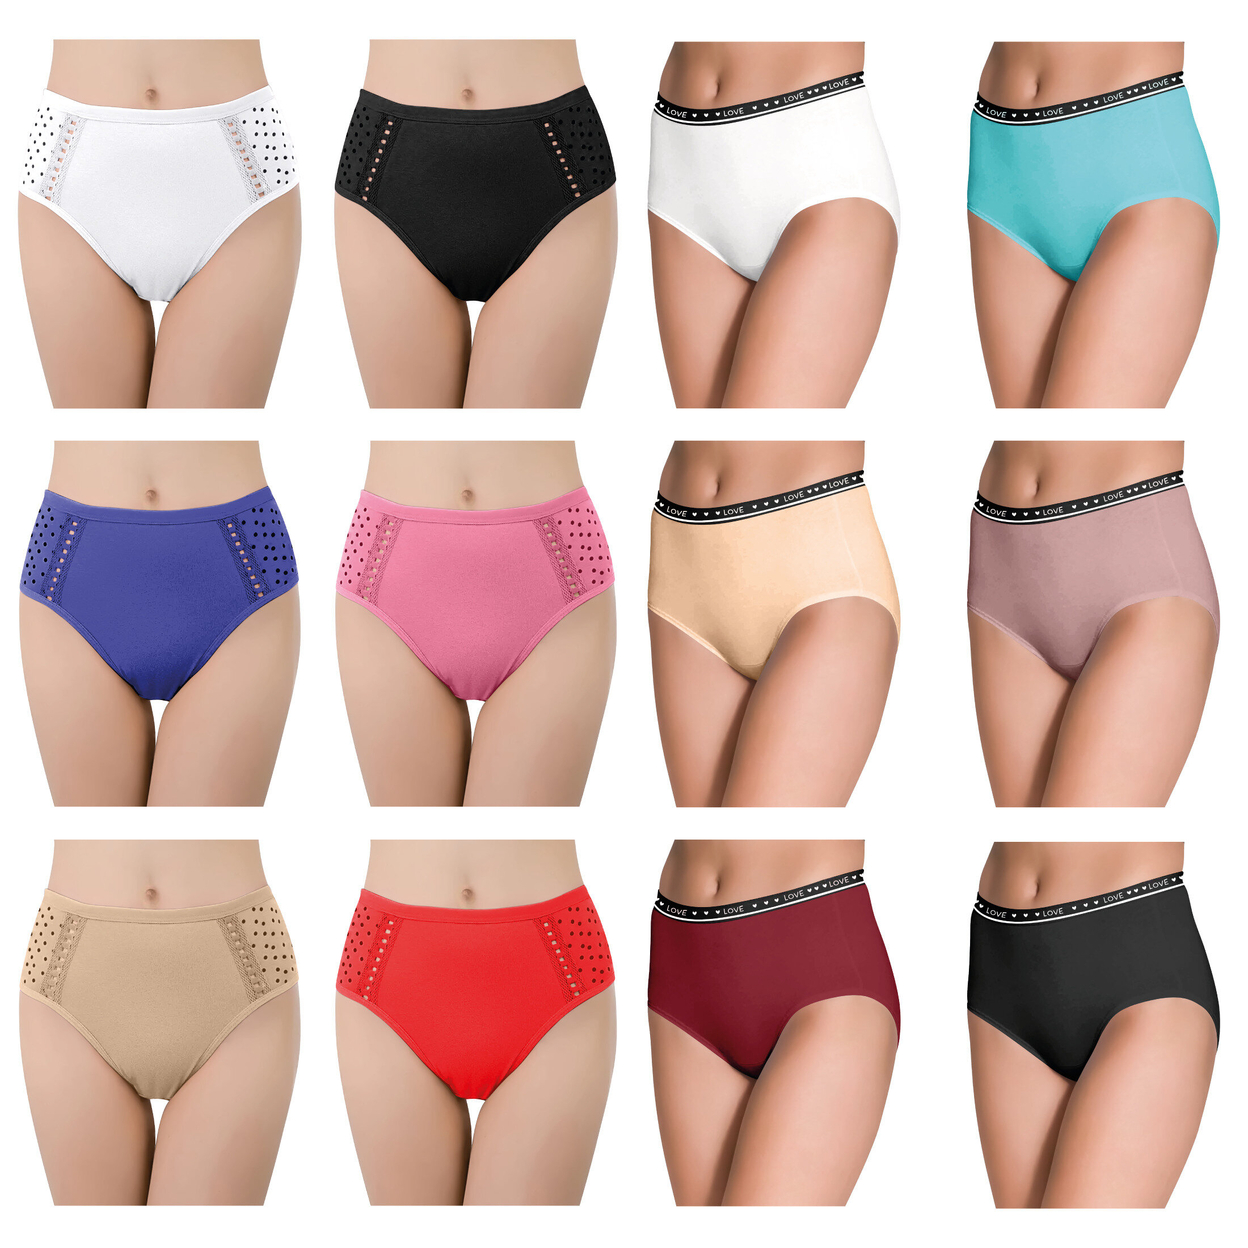 3-Pack: Women's Ultra Soft Moisture Wicking Panties Cotton Perfect Fit Underwear (Plus Sizes Available) - Small